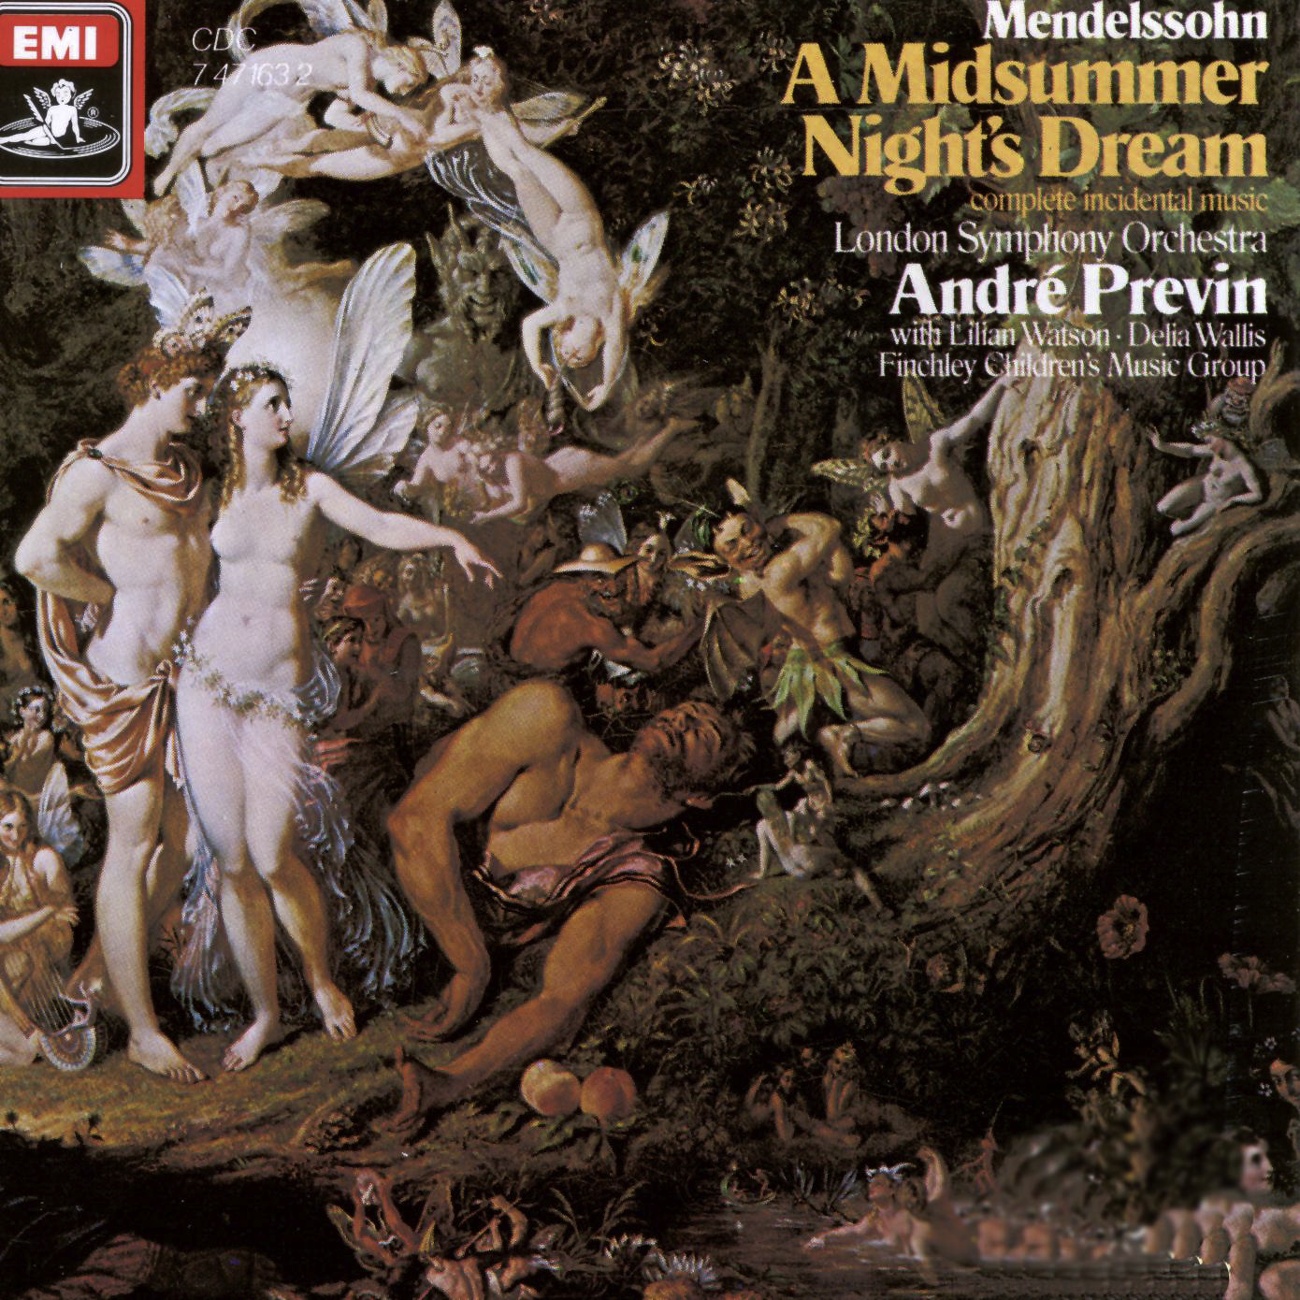 A Midsummer Night's Dream - incidental music Opp. 21 and 61 (1985 Digital Remaster): Melodram: 'Over hill, over dale' and March